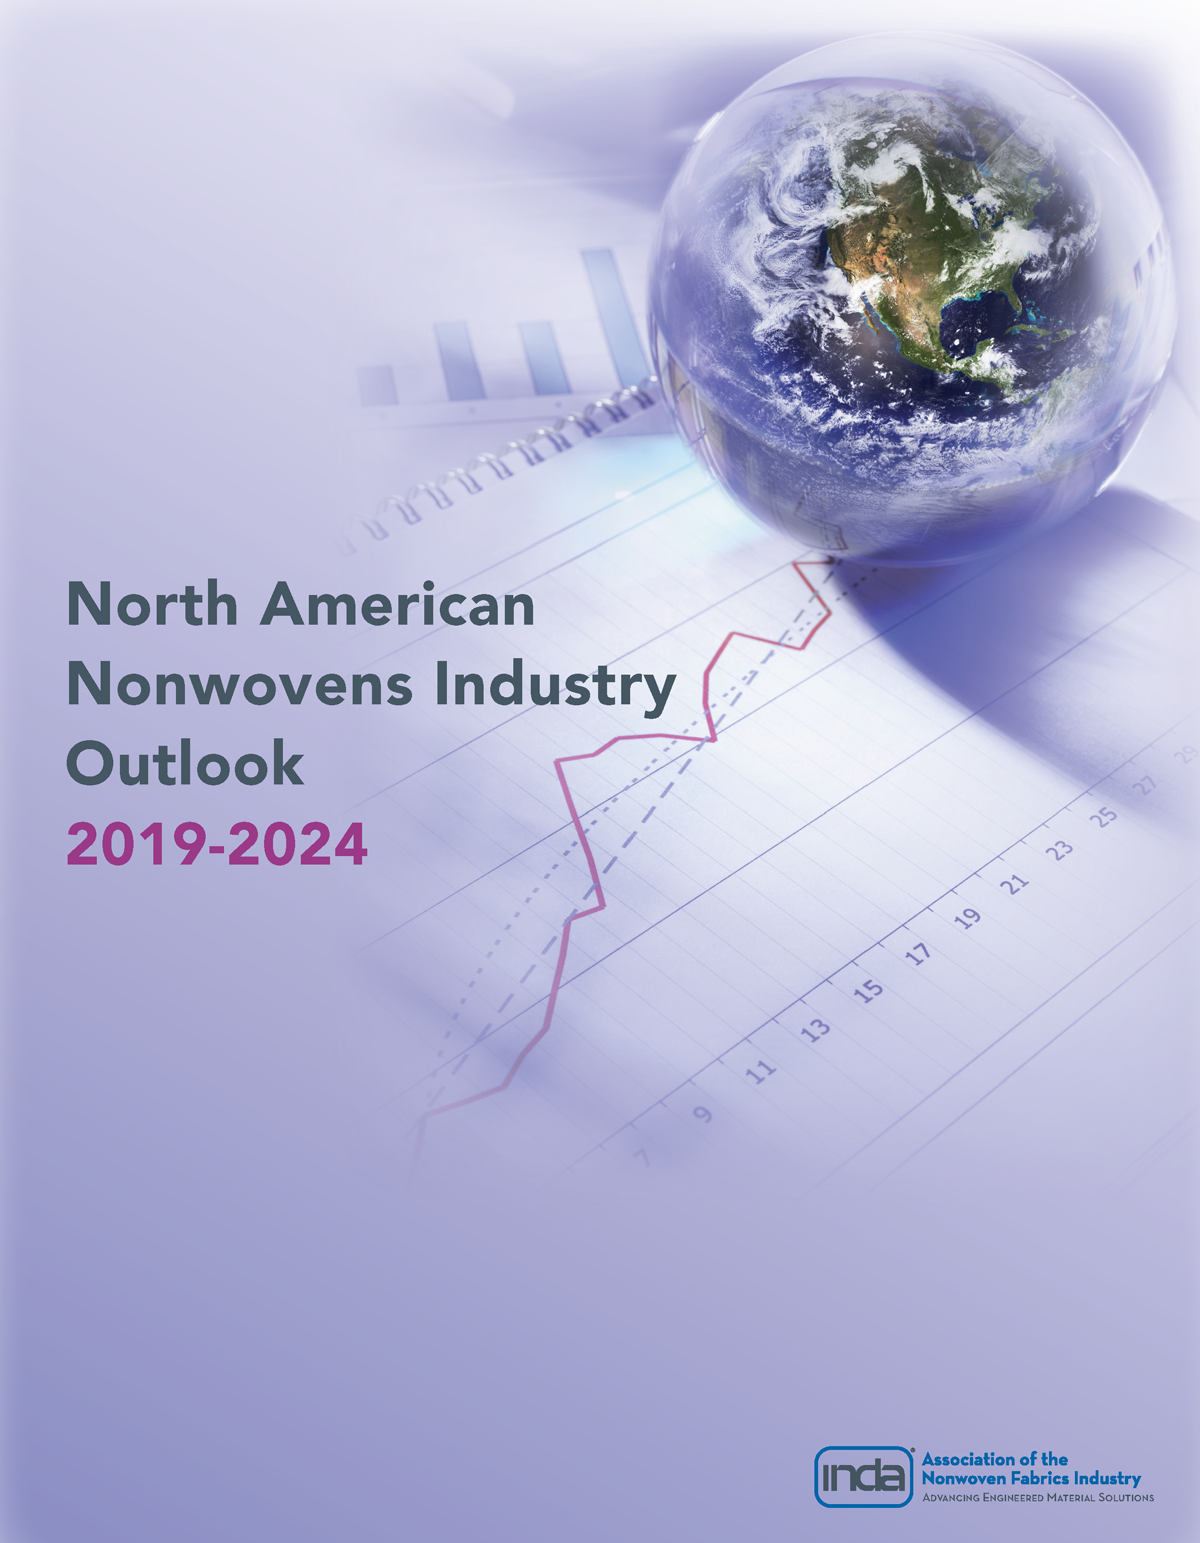 The report gives details of overall markets based on an in-depth combination of primary and secondary research.